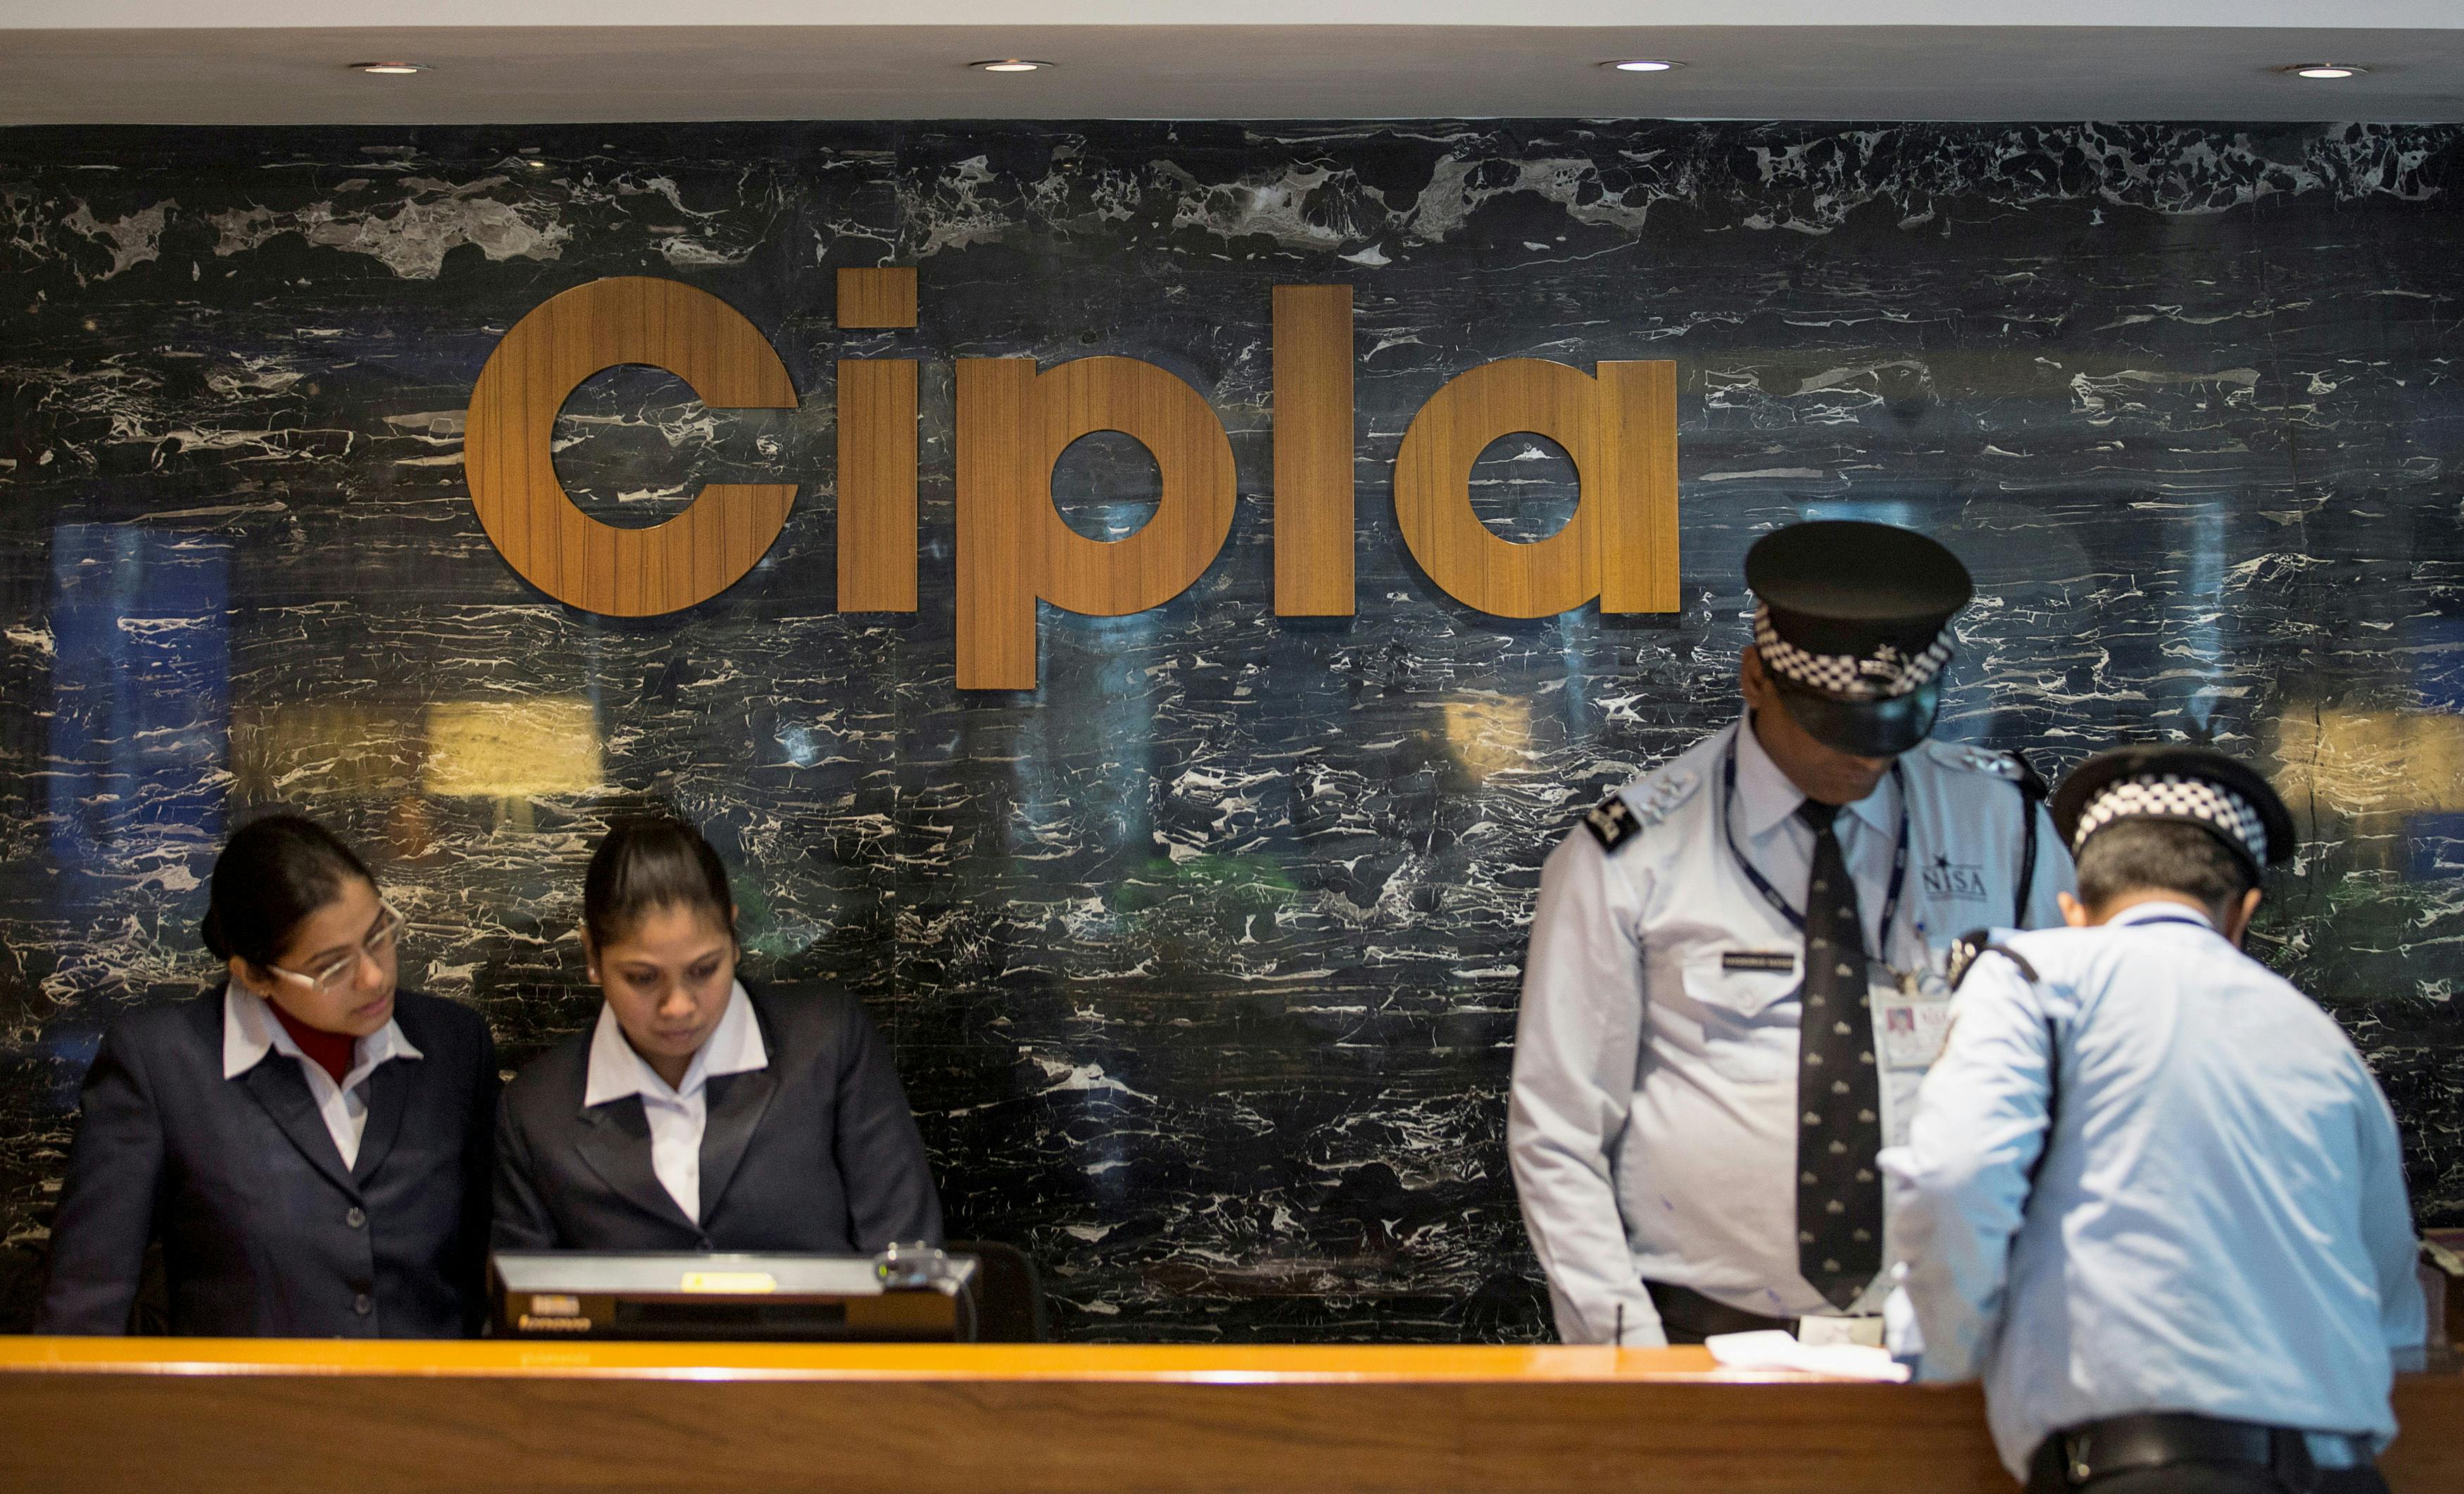 Cipla Limited, established in 1935, is an Indian multinational  pharmaceutical company headquartered in Mumbai, India. Cipla primarily  develops medicines to treat respiratory disease, cardiovascular disease,  arthritis, diabetes, depression, and other ...